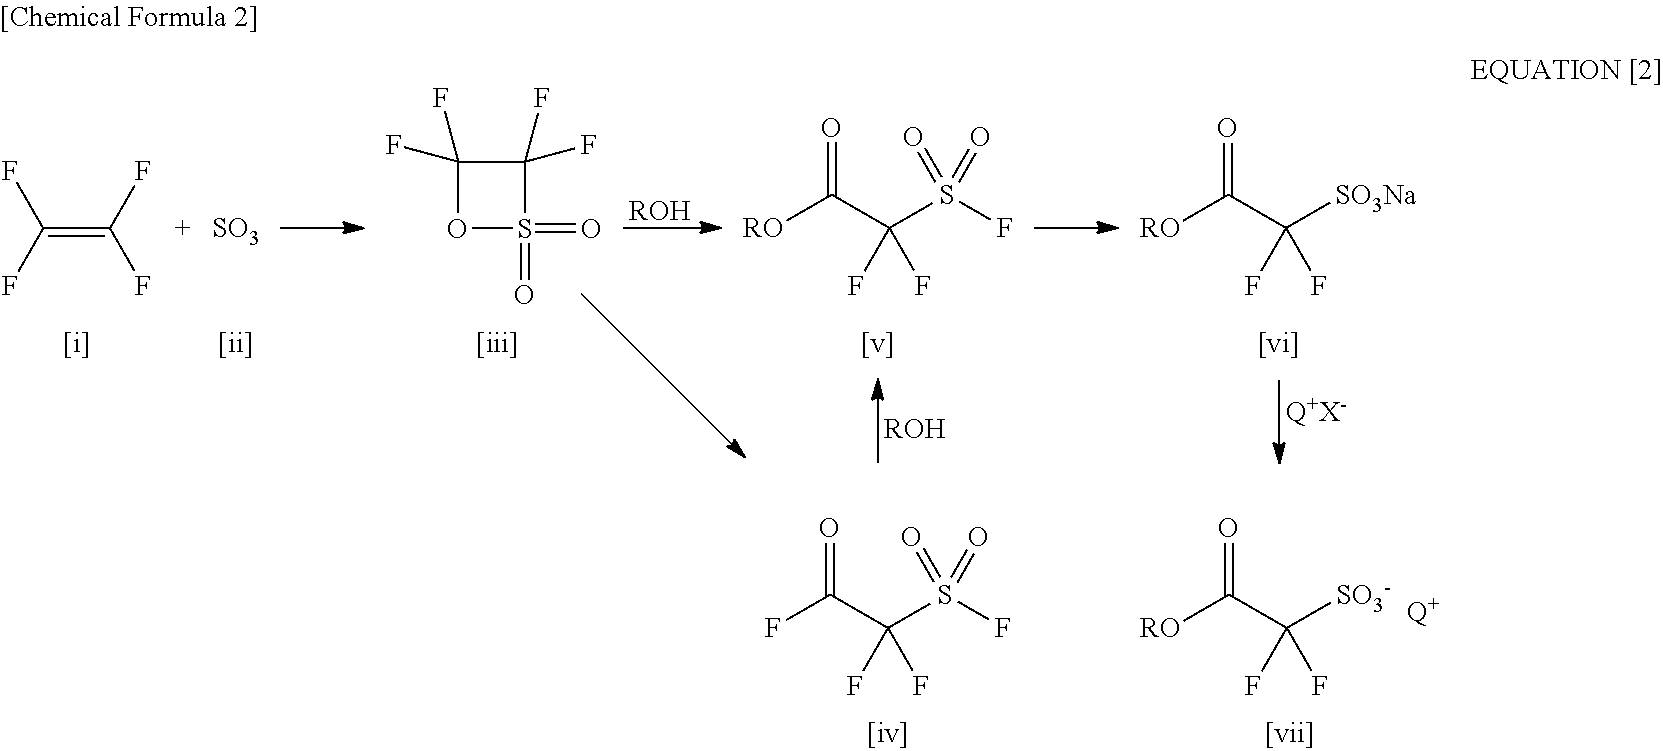 Processes for Production of 2-Bromo-2,2-Difluoroethanol and 2-(Alkylcarbonyloxy)-1,1-Difluoroethanesulfonic Acid Salt